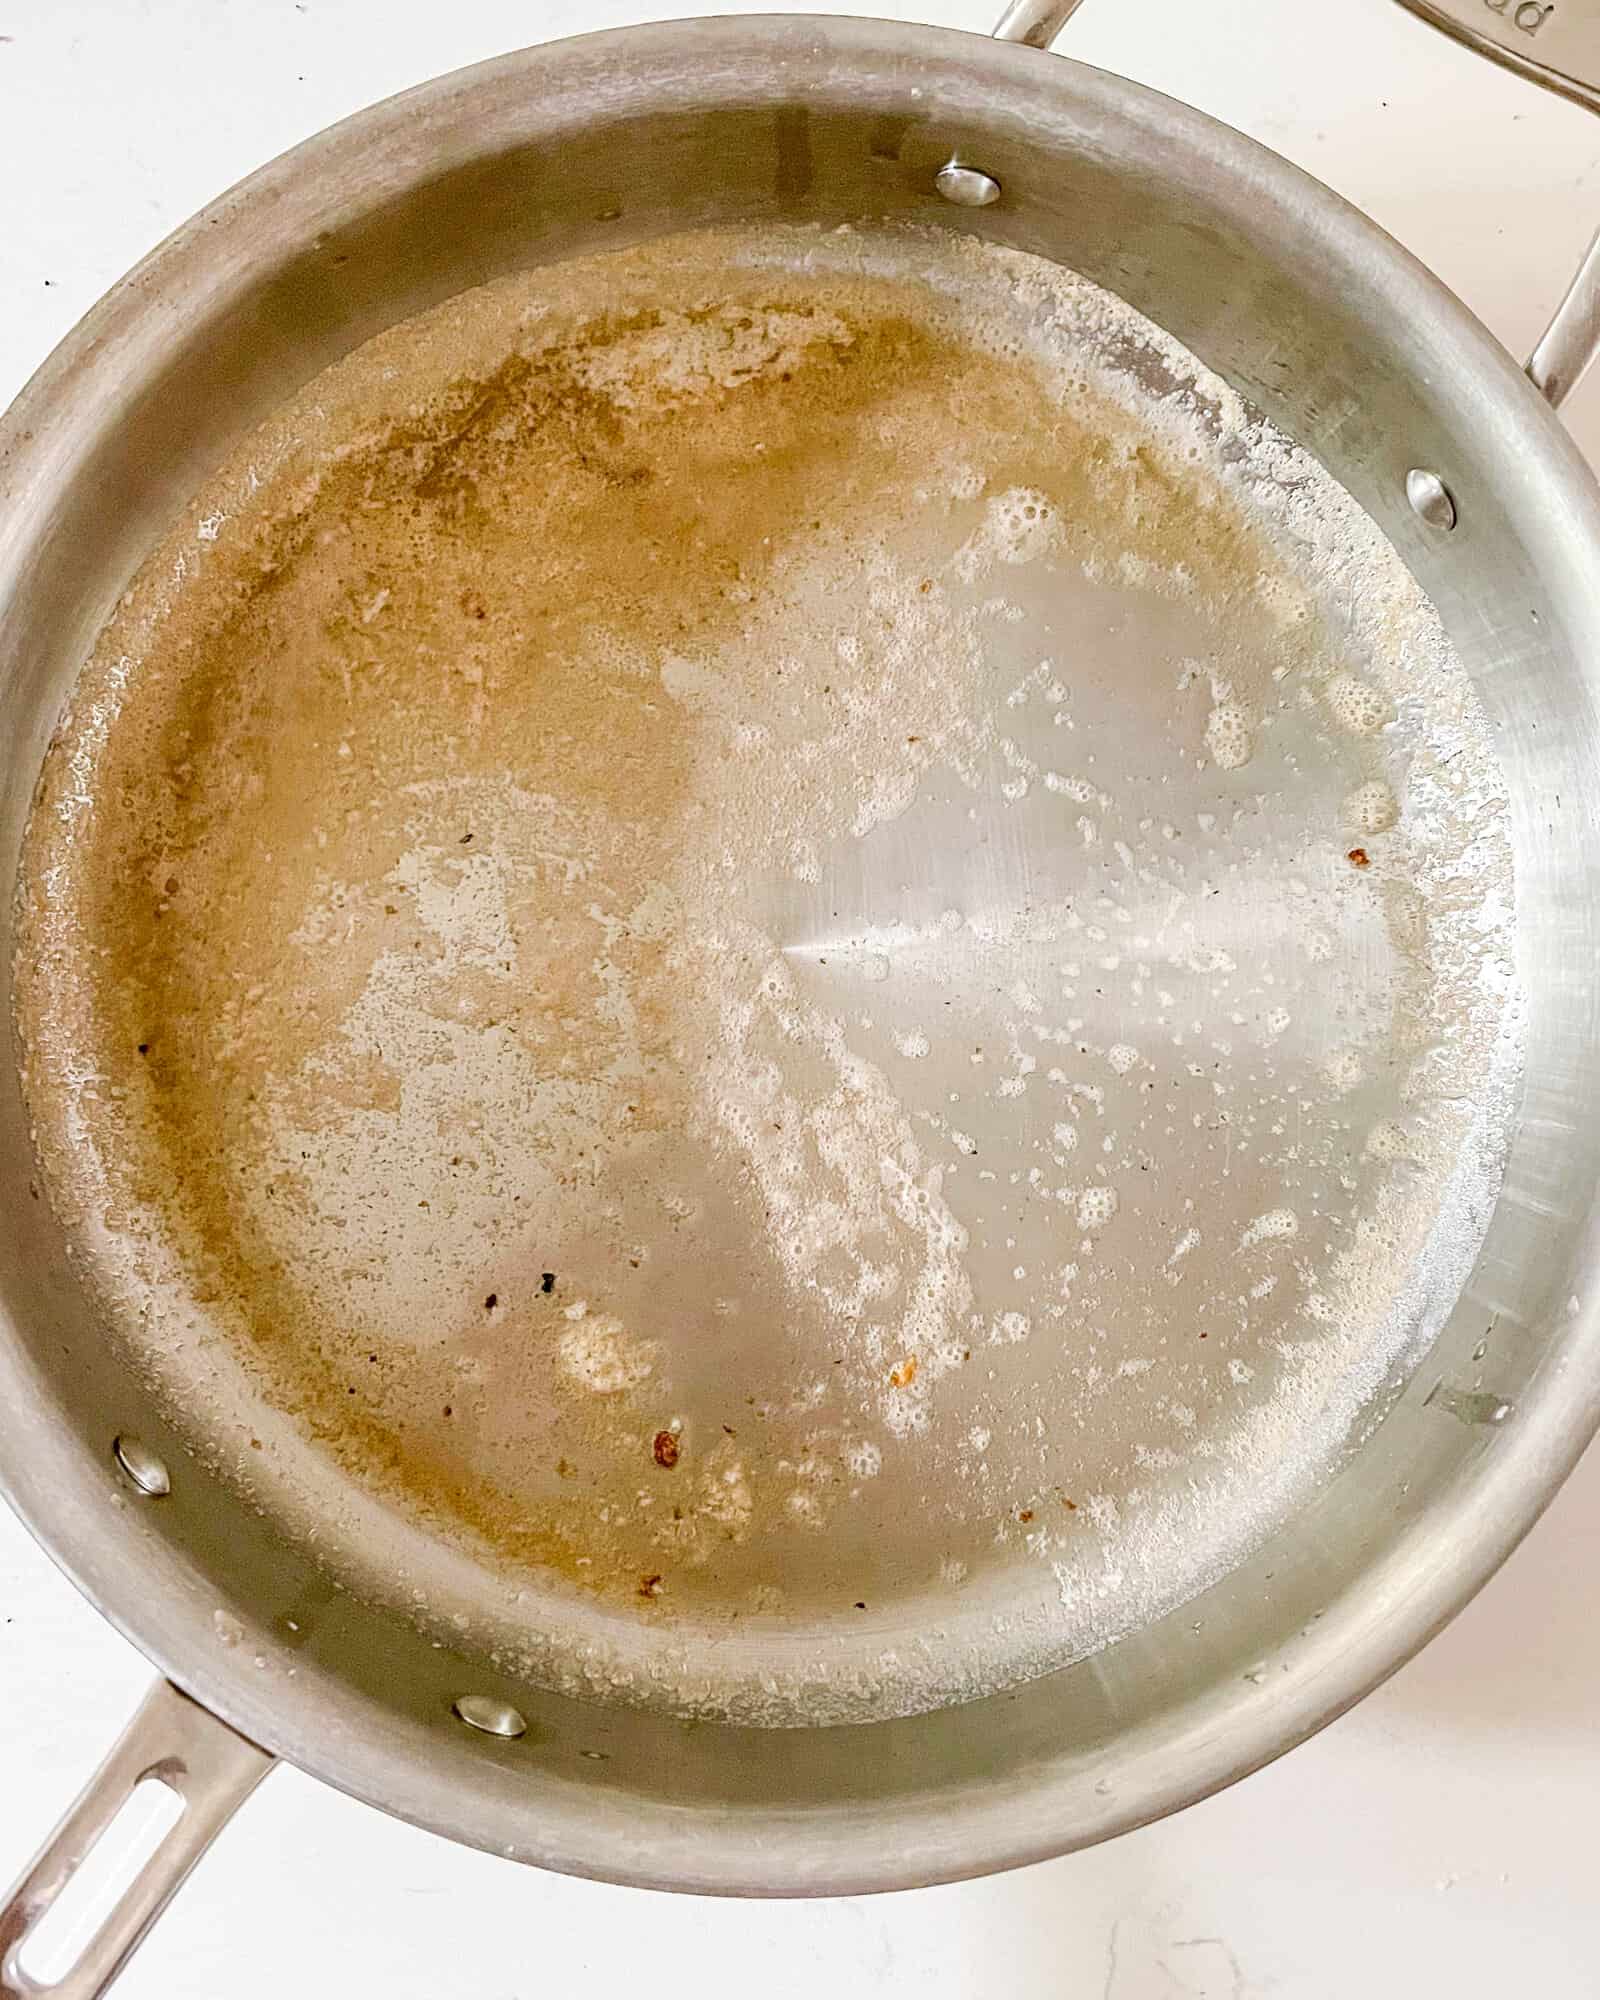 melted butter and olive oil in a frying pan.